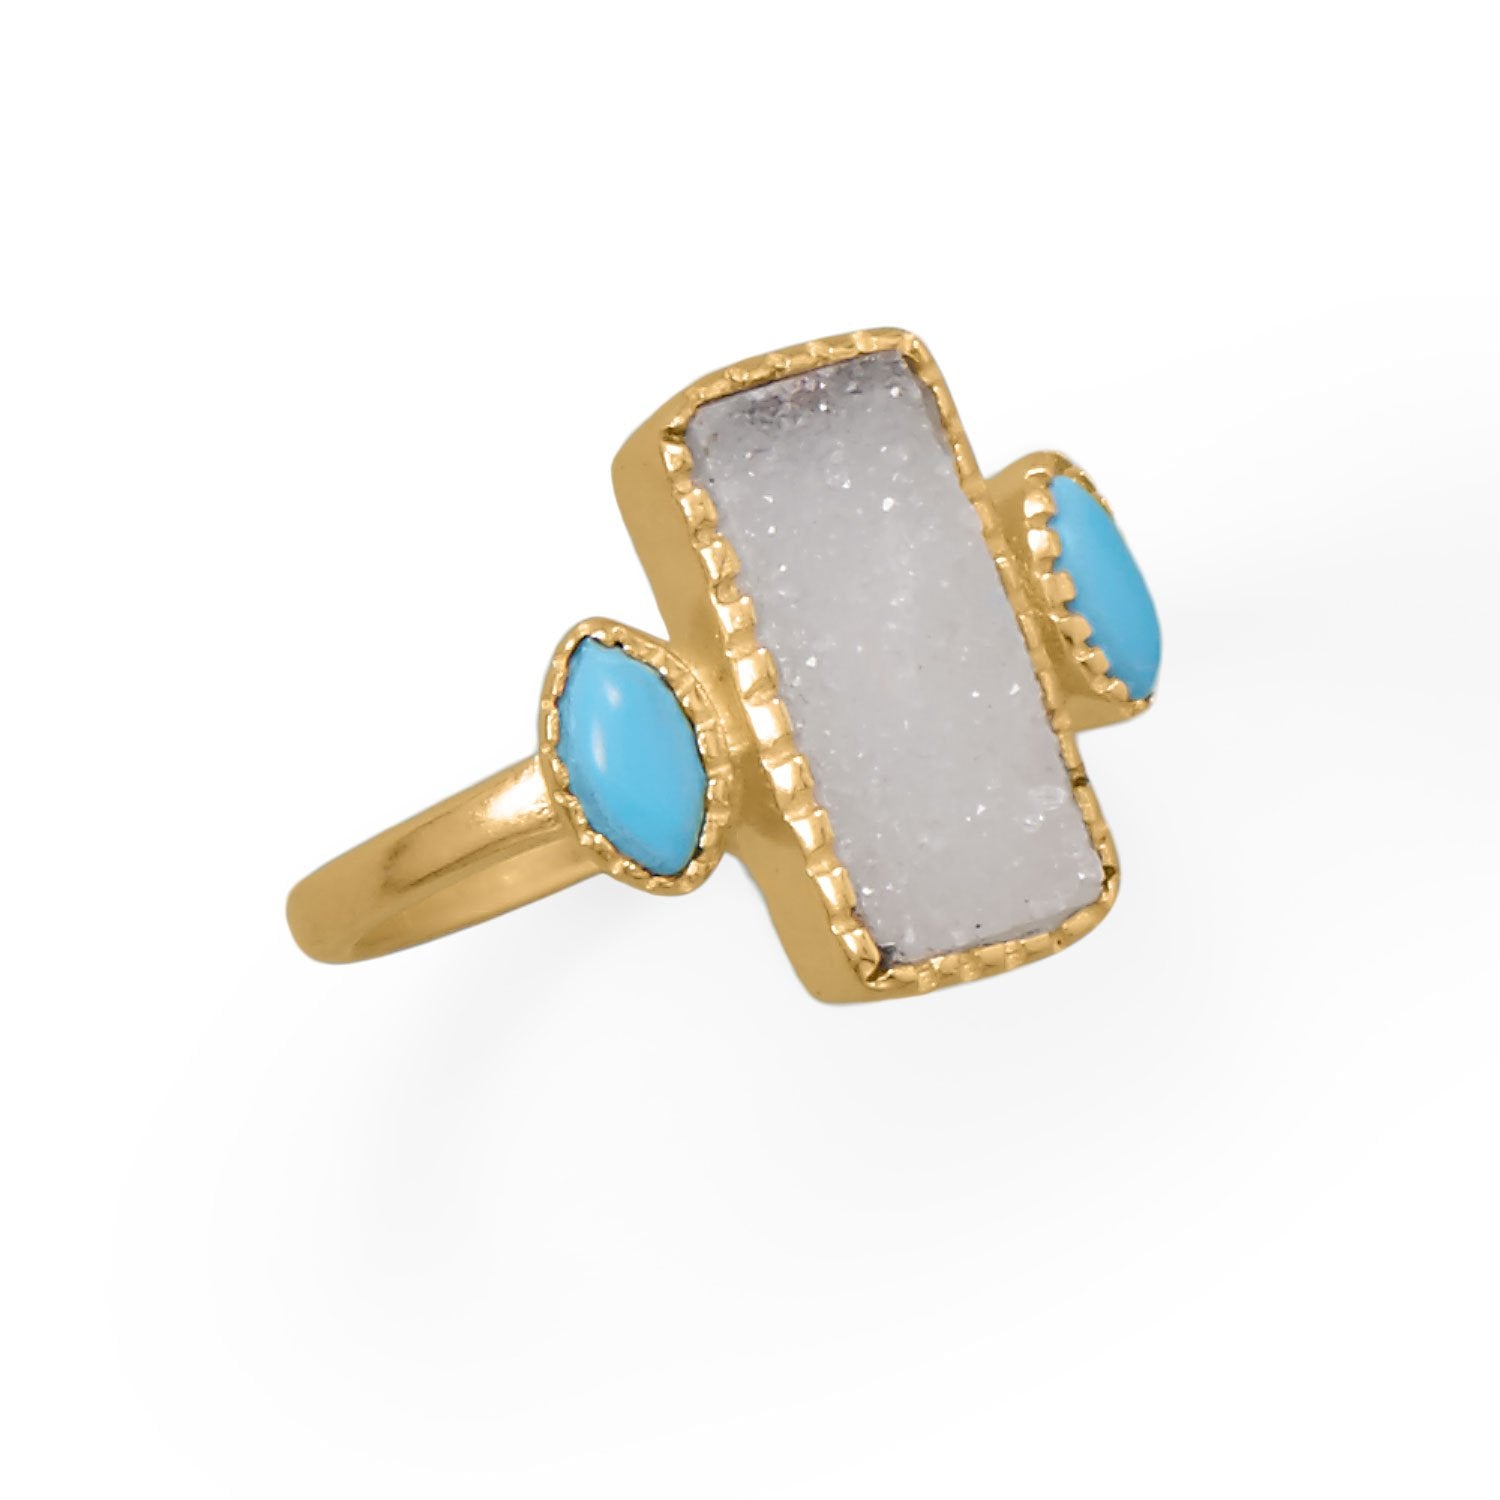 Darling and Dreamy! 14 Karat Gold Plated Druzy and Synthetic Turquoise Ring - Joyeria Lady